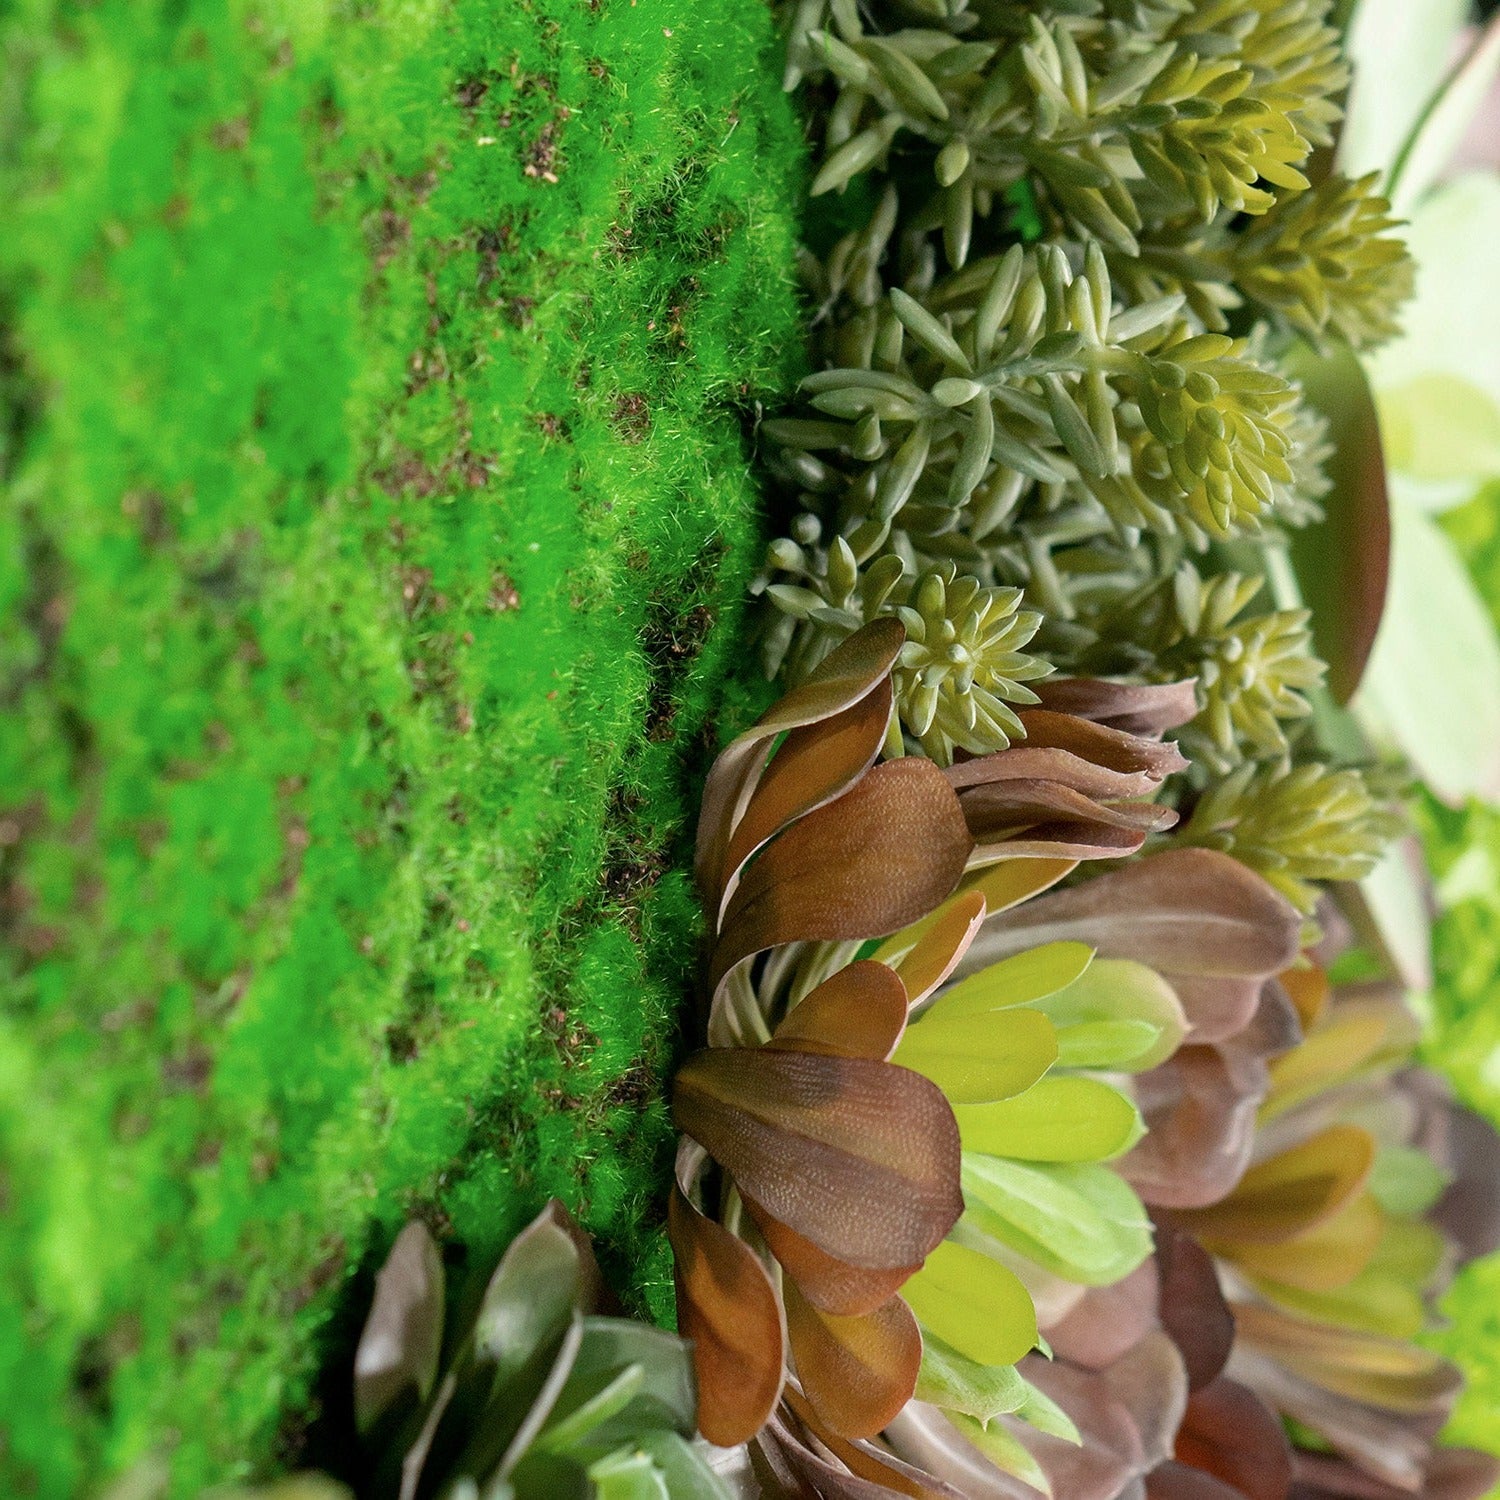 Green Wall, 'Wave Succulent 1'